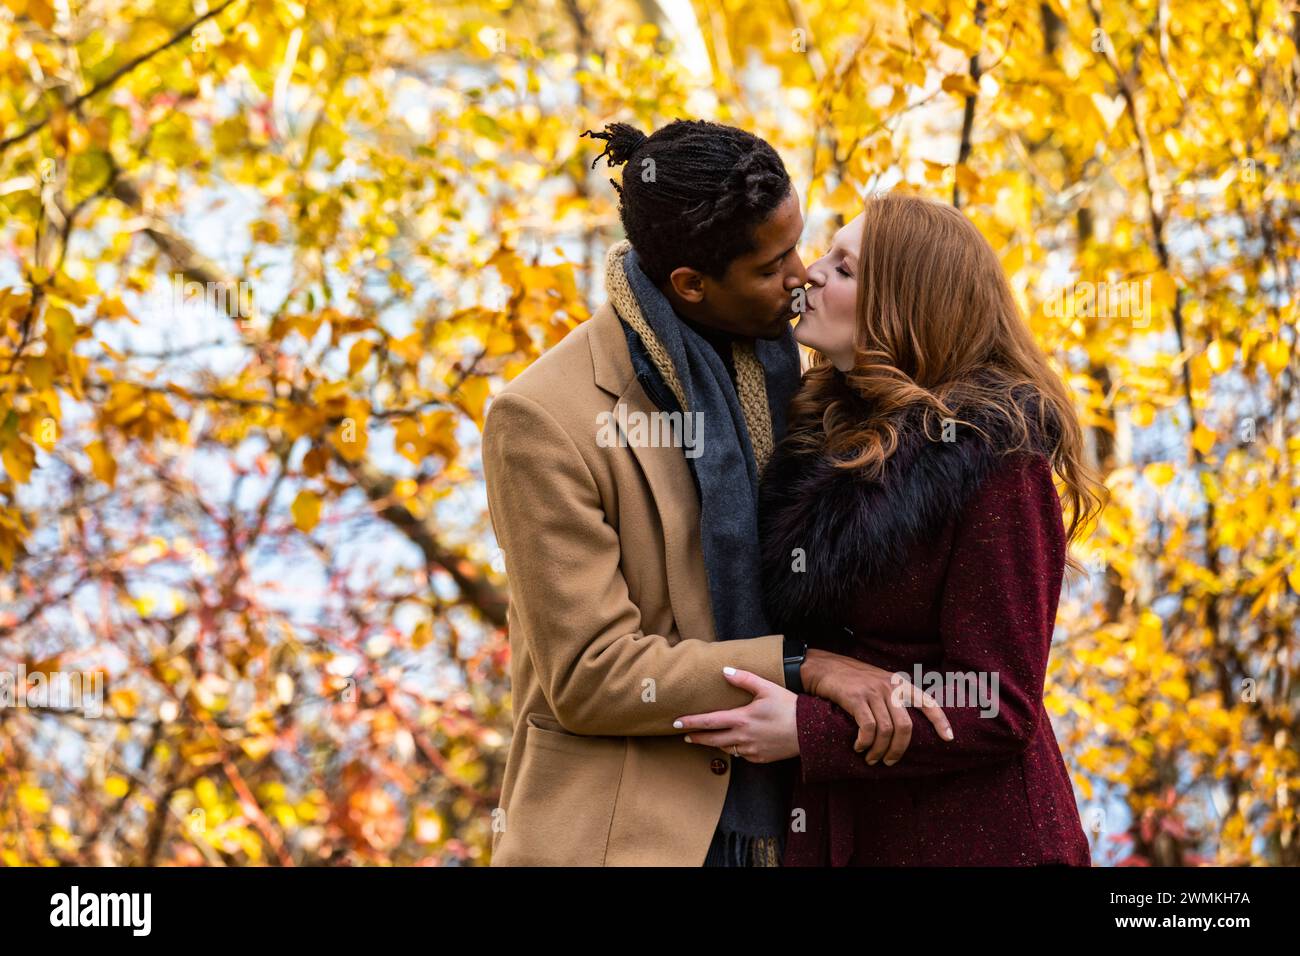 A mixed race married couple hugging and kissing each other while spending quality time together during a fall family outing in a city park Stock Photo